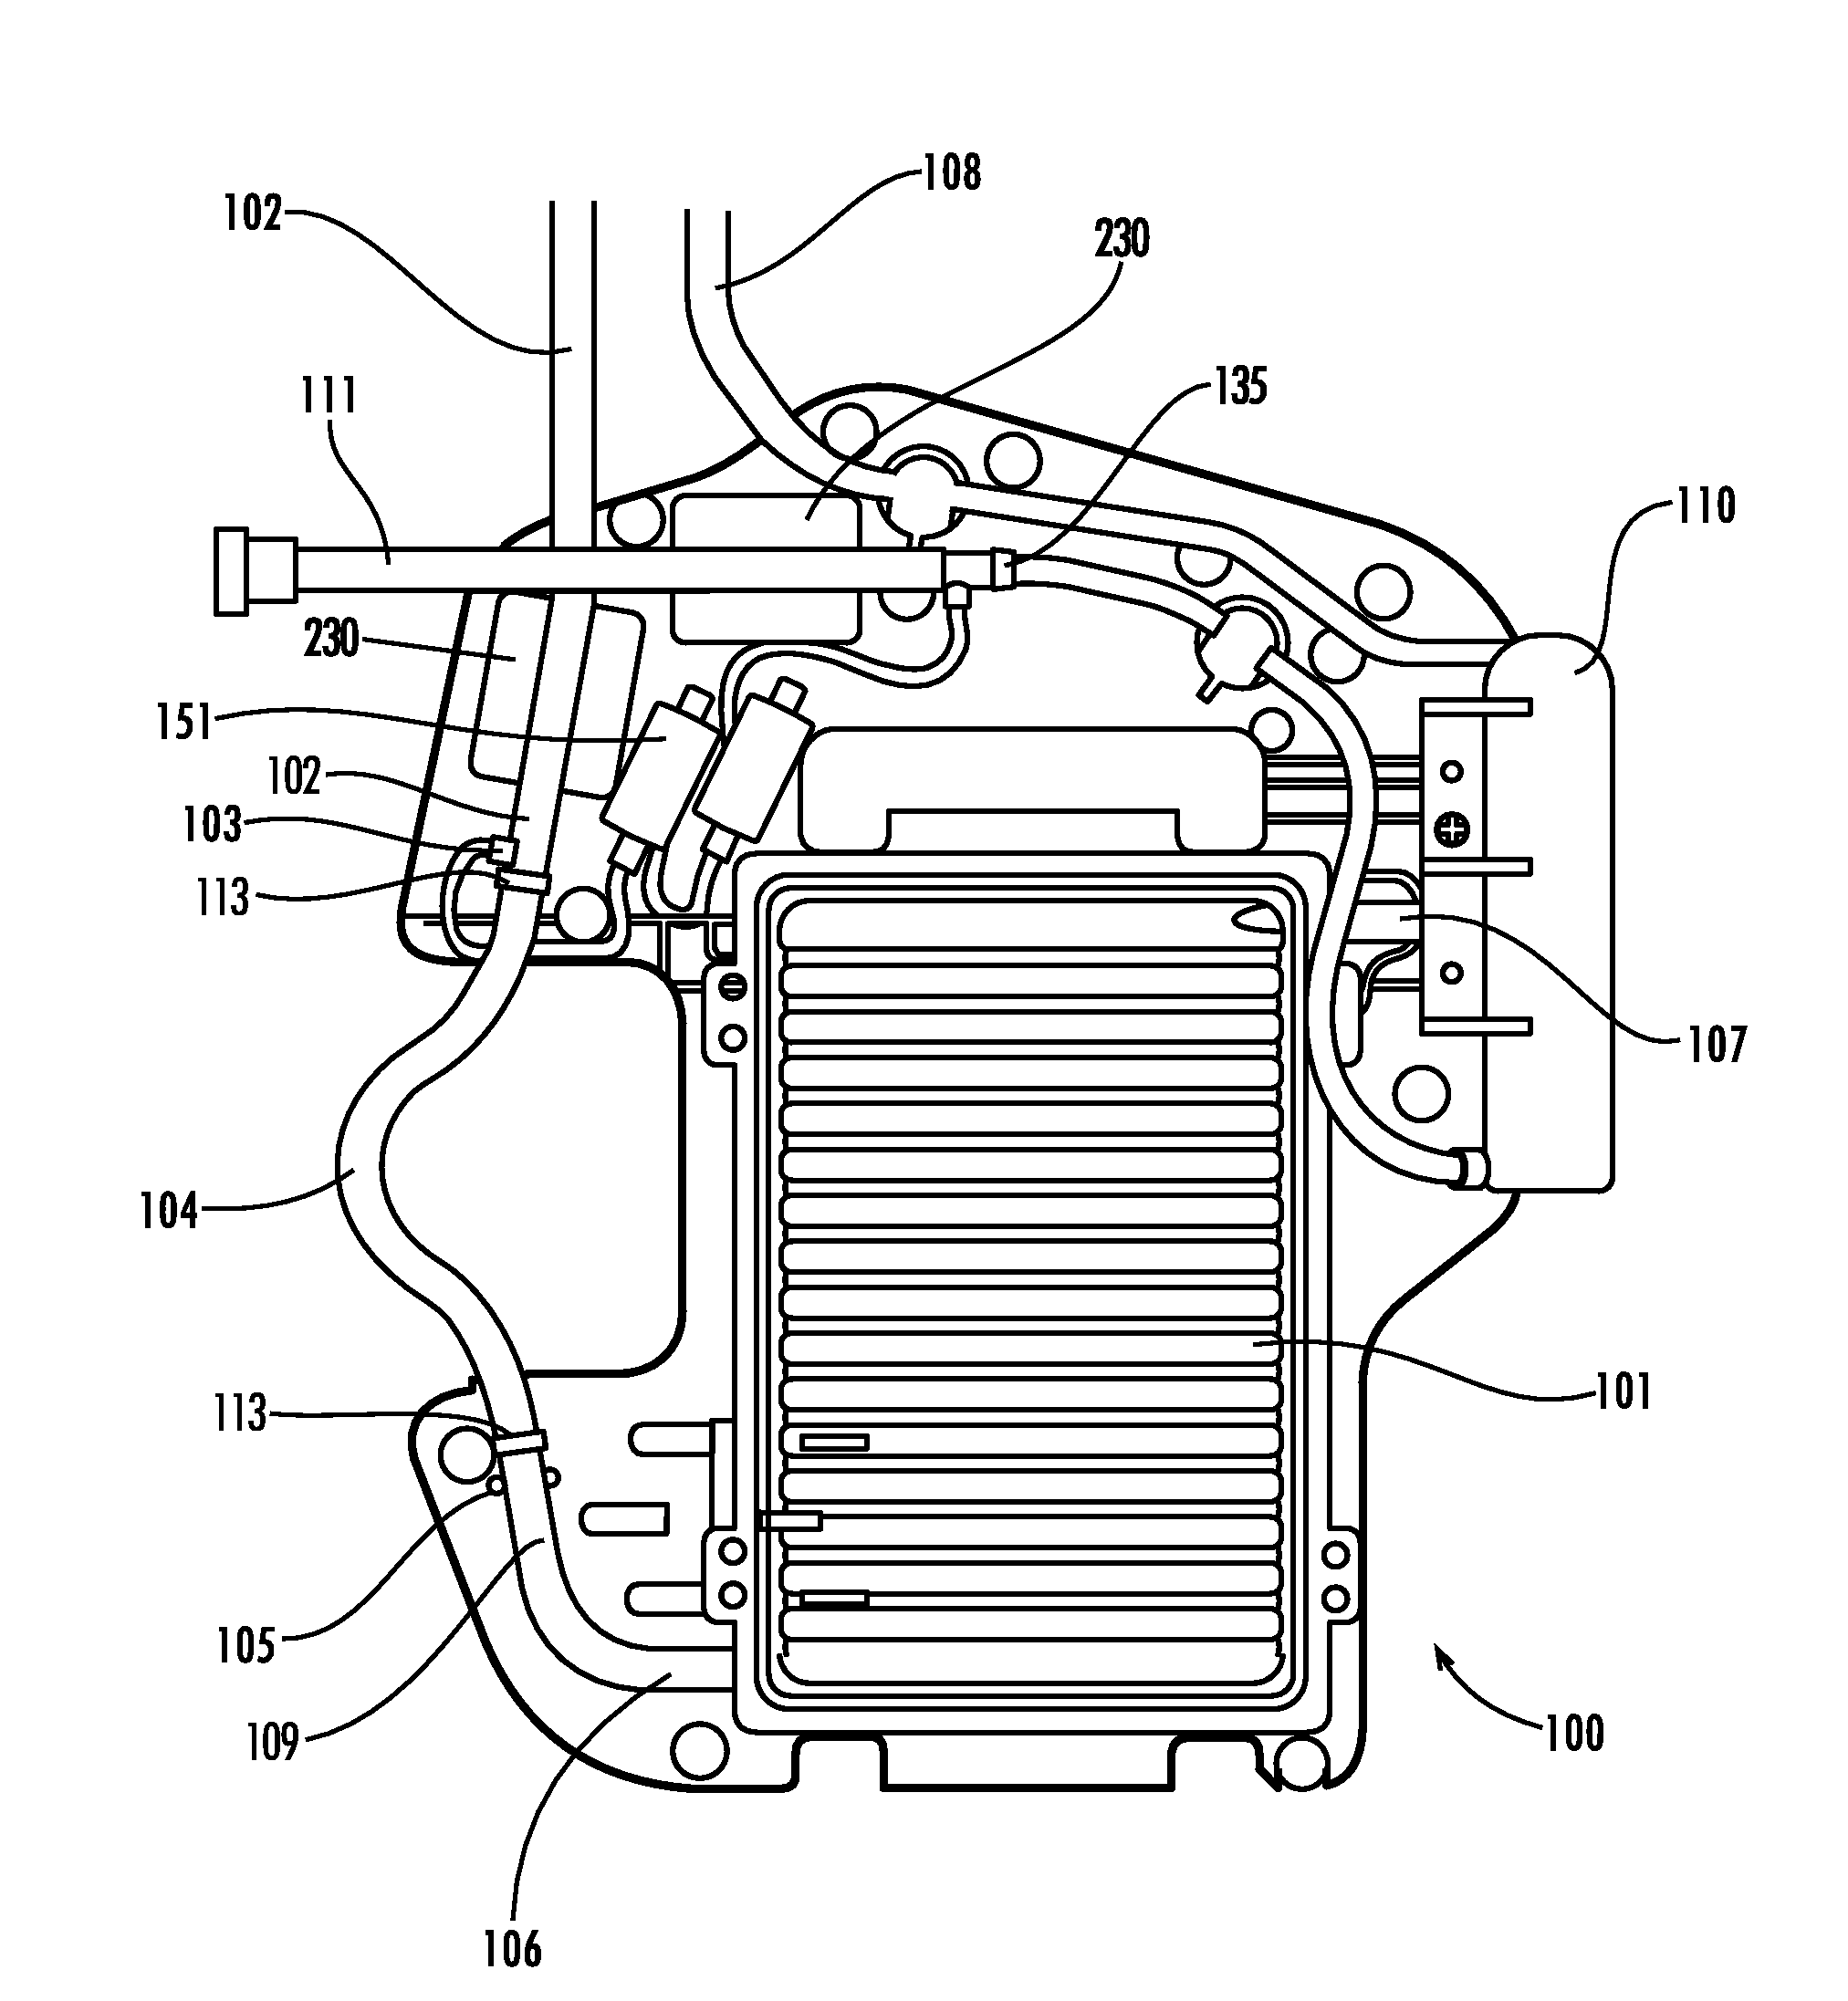 Heat Exchange System For A Pump Device